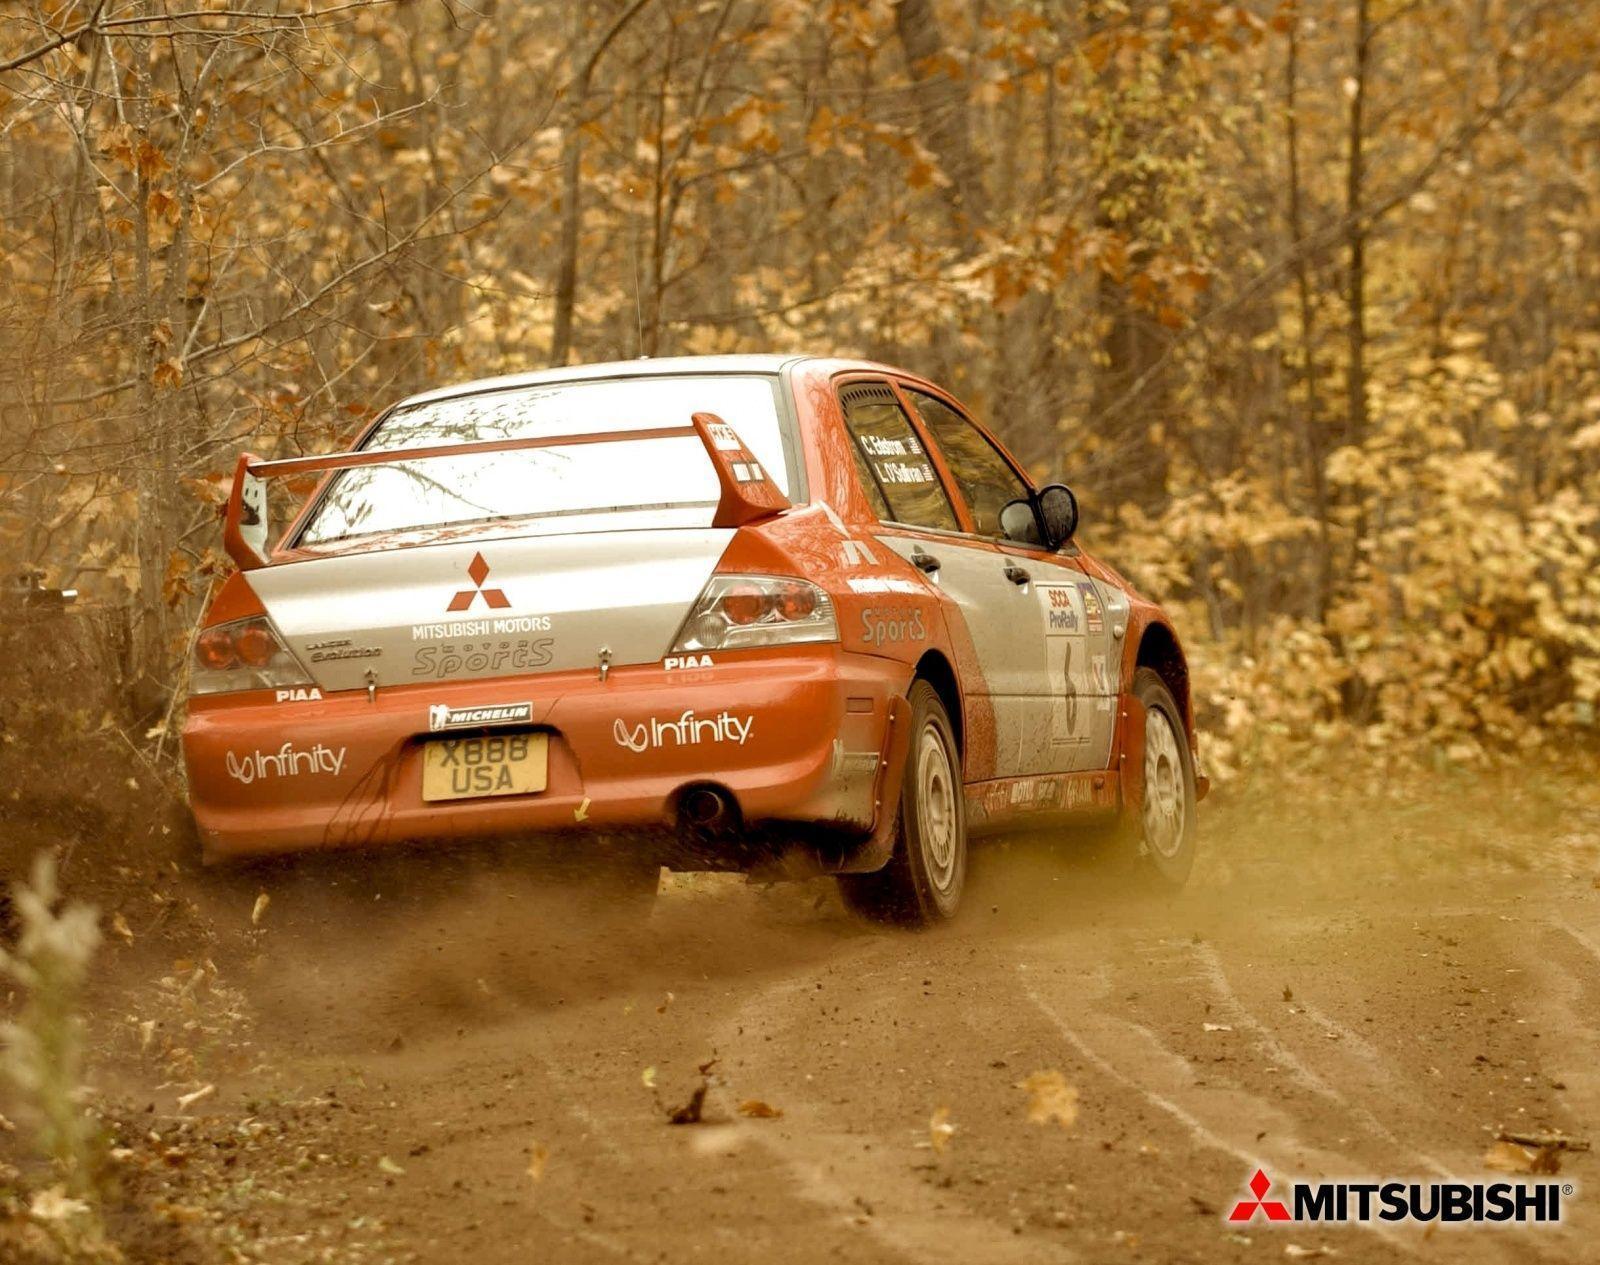 Mitsubishi rally wallpaper and image, picture, photo